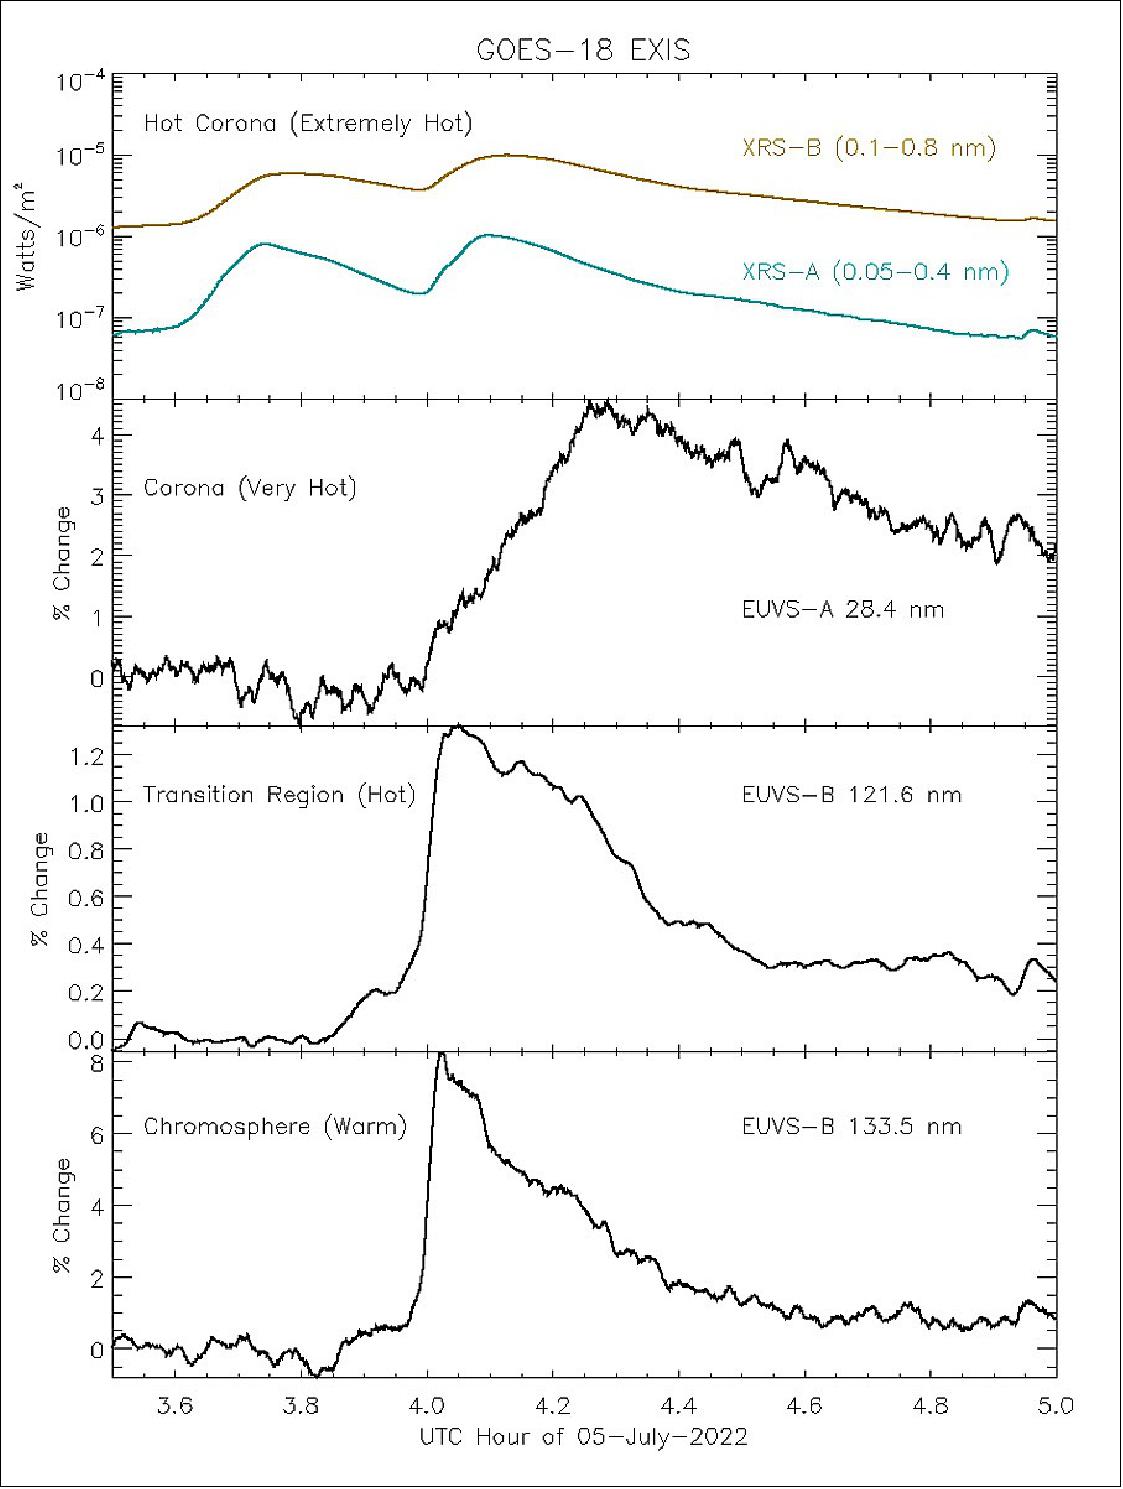 Figure 21: On July 5, 2022, EXIS observed a pair of moderate flares that erupted on the sun between 3:30 and 4:30 UTC. EXIS has two main sensors, the X-Ray Sensor (XRS), which measures soft X-rays, and the Extreme Ultraviolet Sensors (EUVS), which measure extreme ultraviolet light. The two flares appeared differently near Earth and demonstrate why EXIS observes light from the sun at multiple wavelengths. EXIS, with its multiple sensors, can observe and quantify the difference between the light from solar flares and help determine in real-time whether the flares will affect us on Earth (image credit: NOAA/NESDIS)